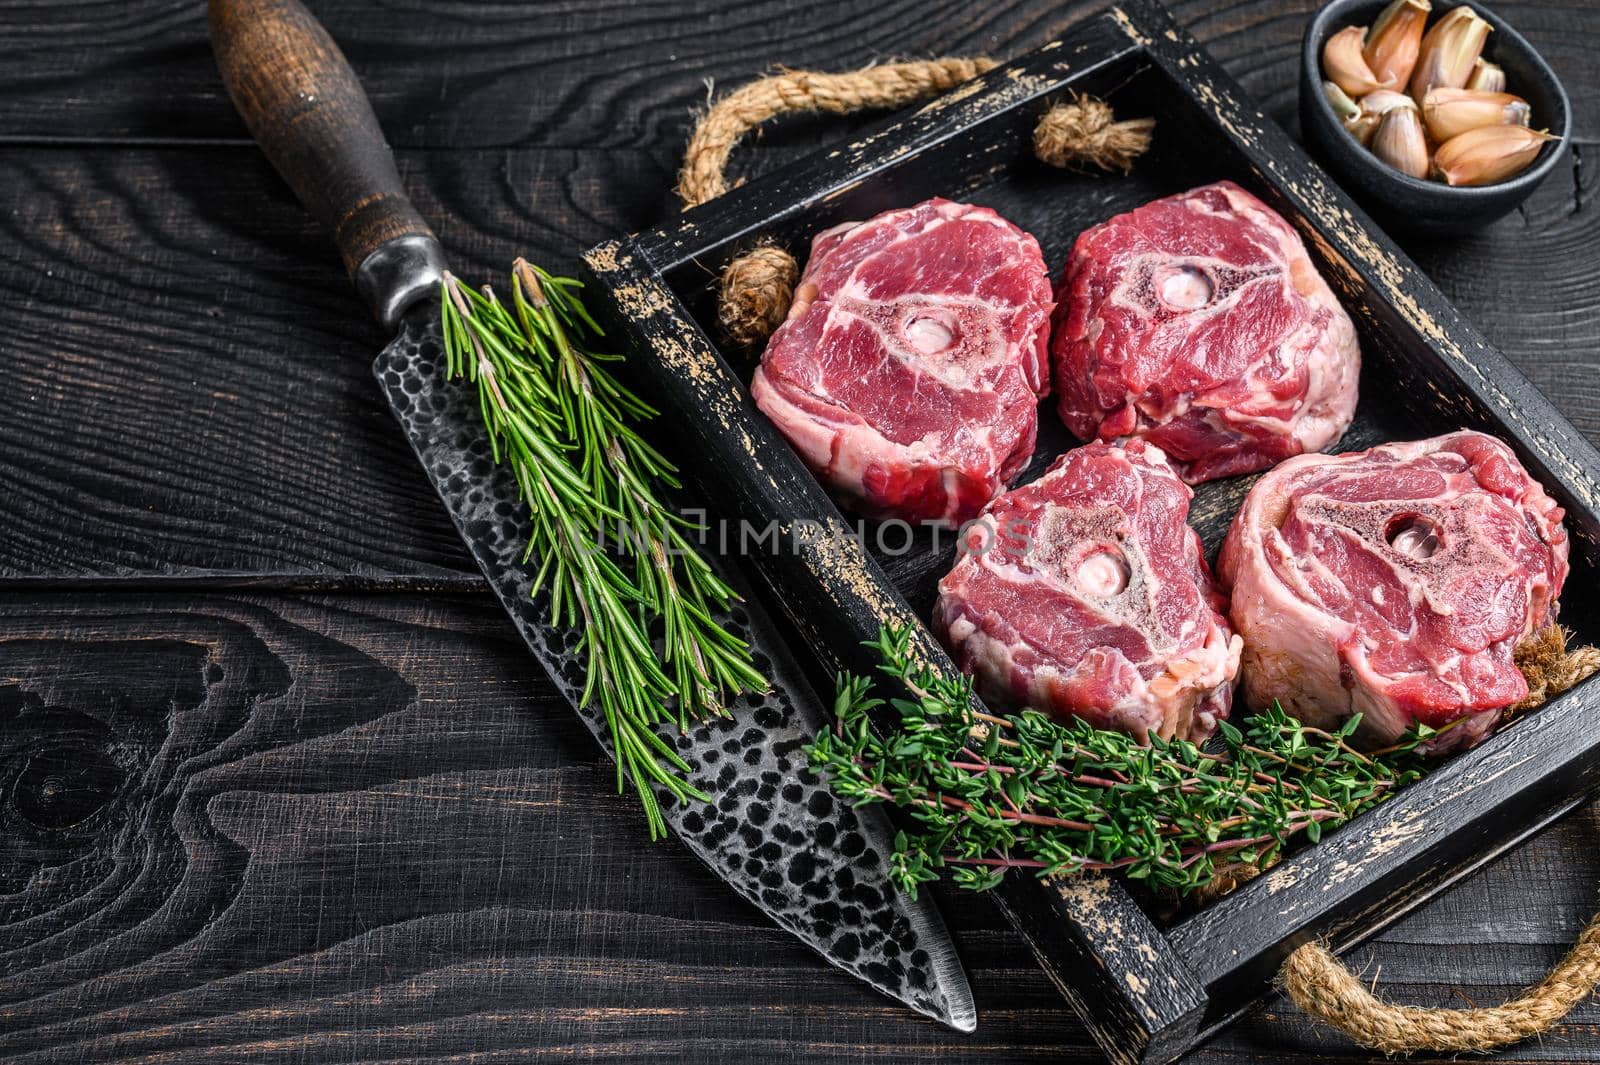 Raw lamb neck meat on a butcher table with knife. Black wooden background. Top view. Copy space by Composter